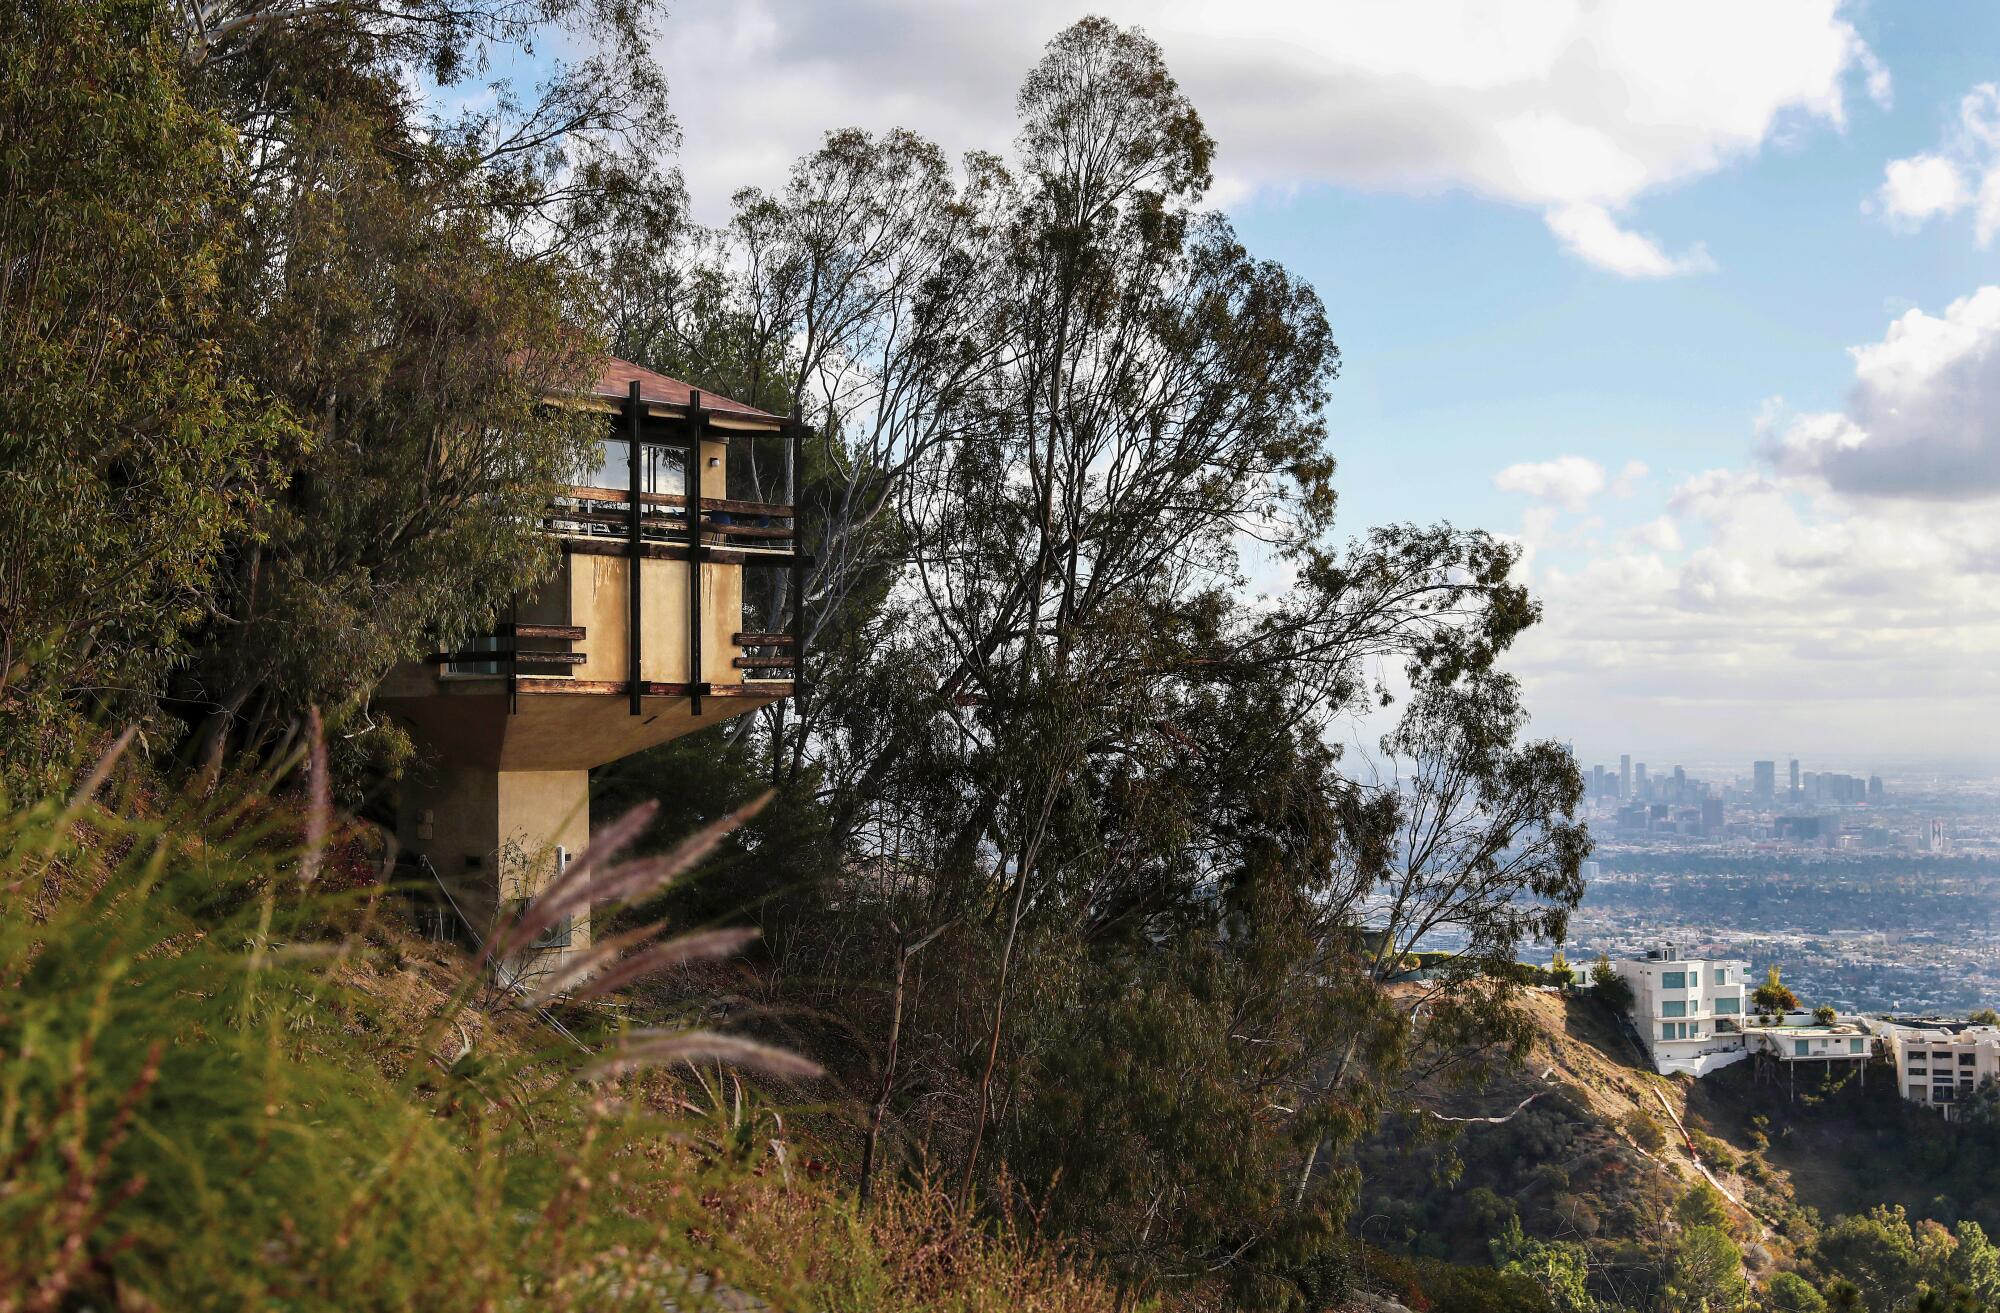 Bernard Judge's Tree House, surrounded by trees, emerges from a narrow base on a steep hillside